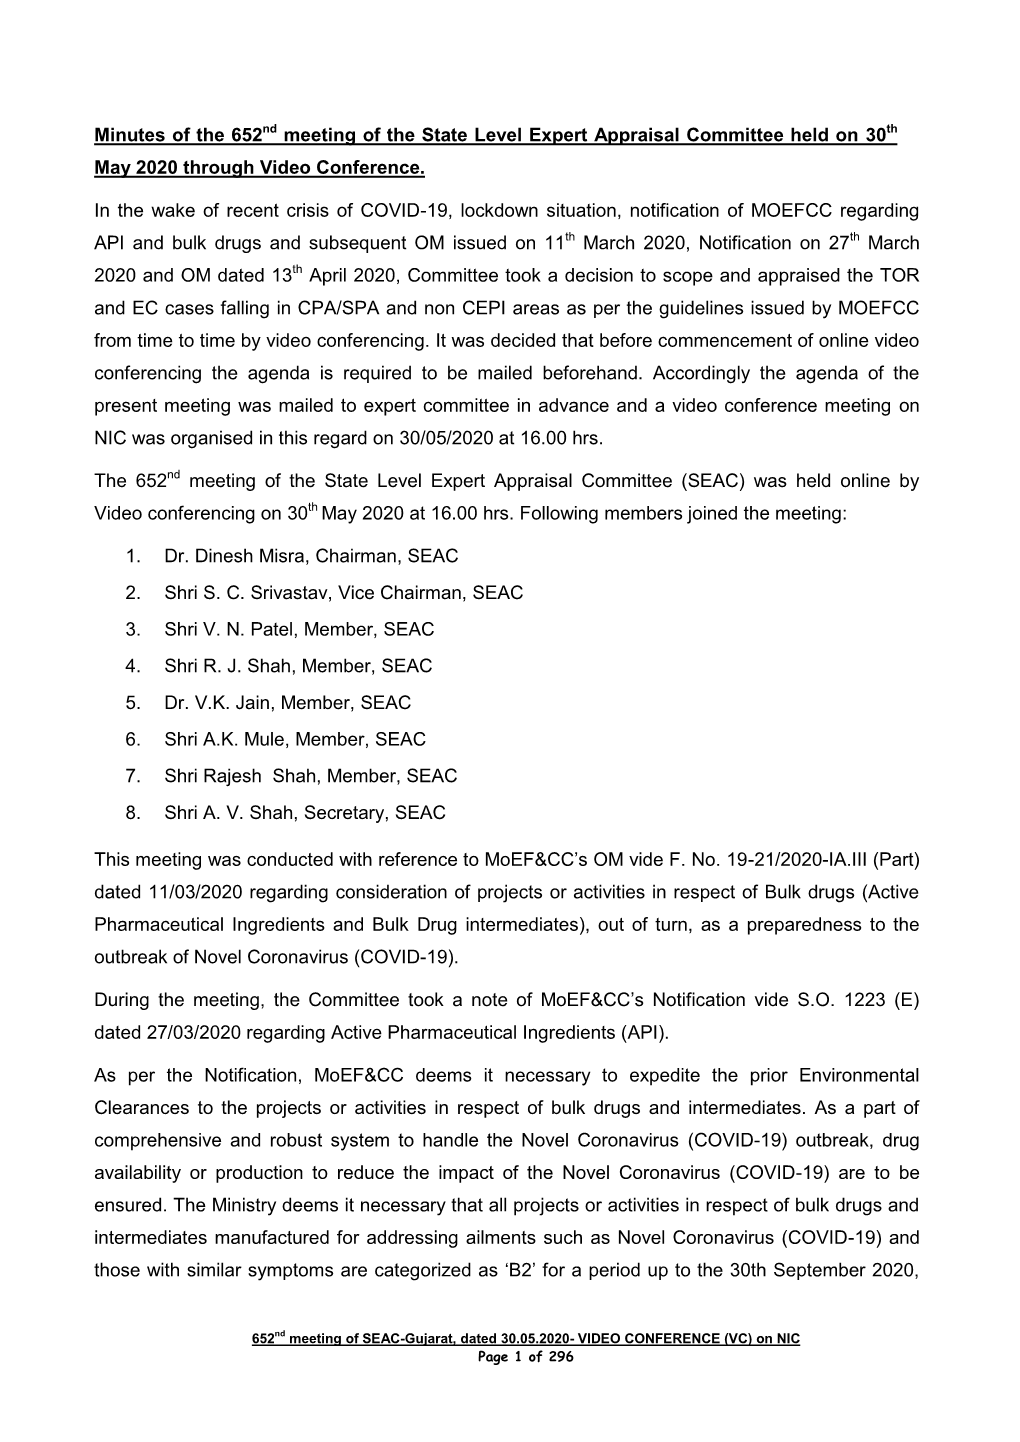 Minutes of the 652Nd Meeting of the State Level Expert Appraisal Committee Held on 30Th May 2020 Through Video Conference